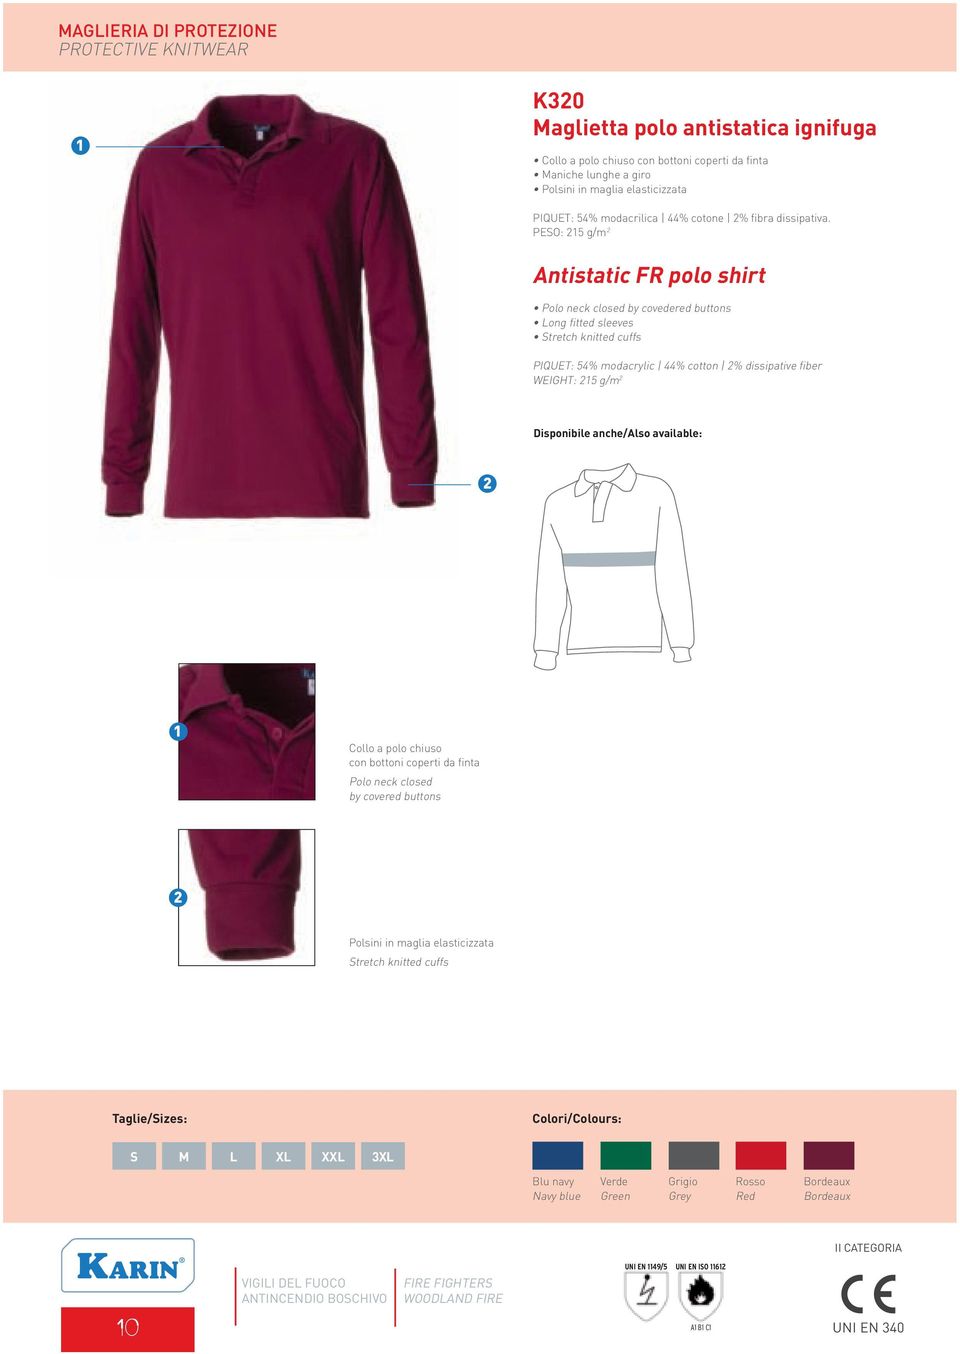 PESO: 215 g/m 2 Antistatic FR polo shirt Polo neck closed by covedered buttons Long fitted sleeves Stretch knitted cuffs PIQUET: 54% modacrylic 44% cotton 2% dissipative fiber WEIGHT: 215 g/m 2